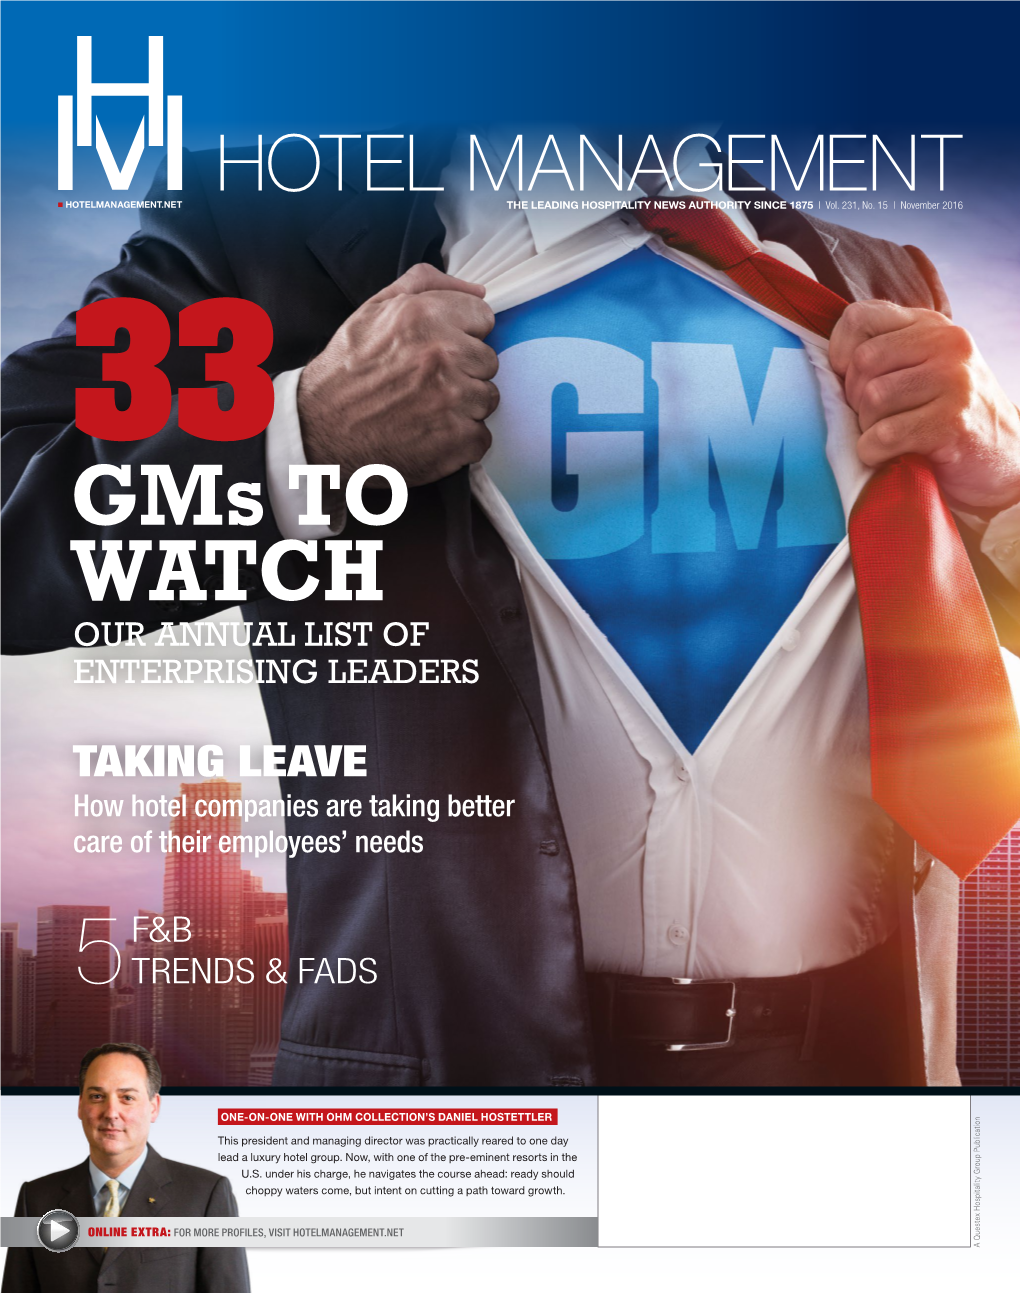 Gms to WATCH OUR ANNUAL LIST of ENTERPRISING LEADERS